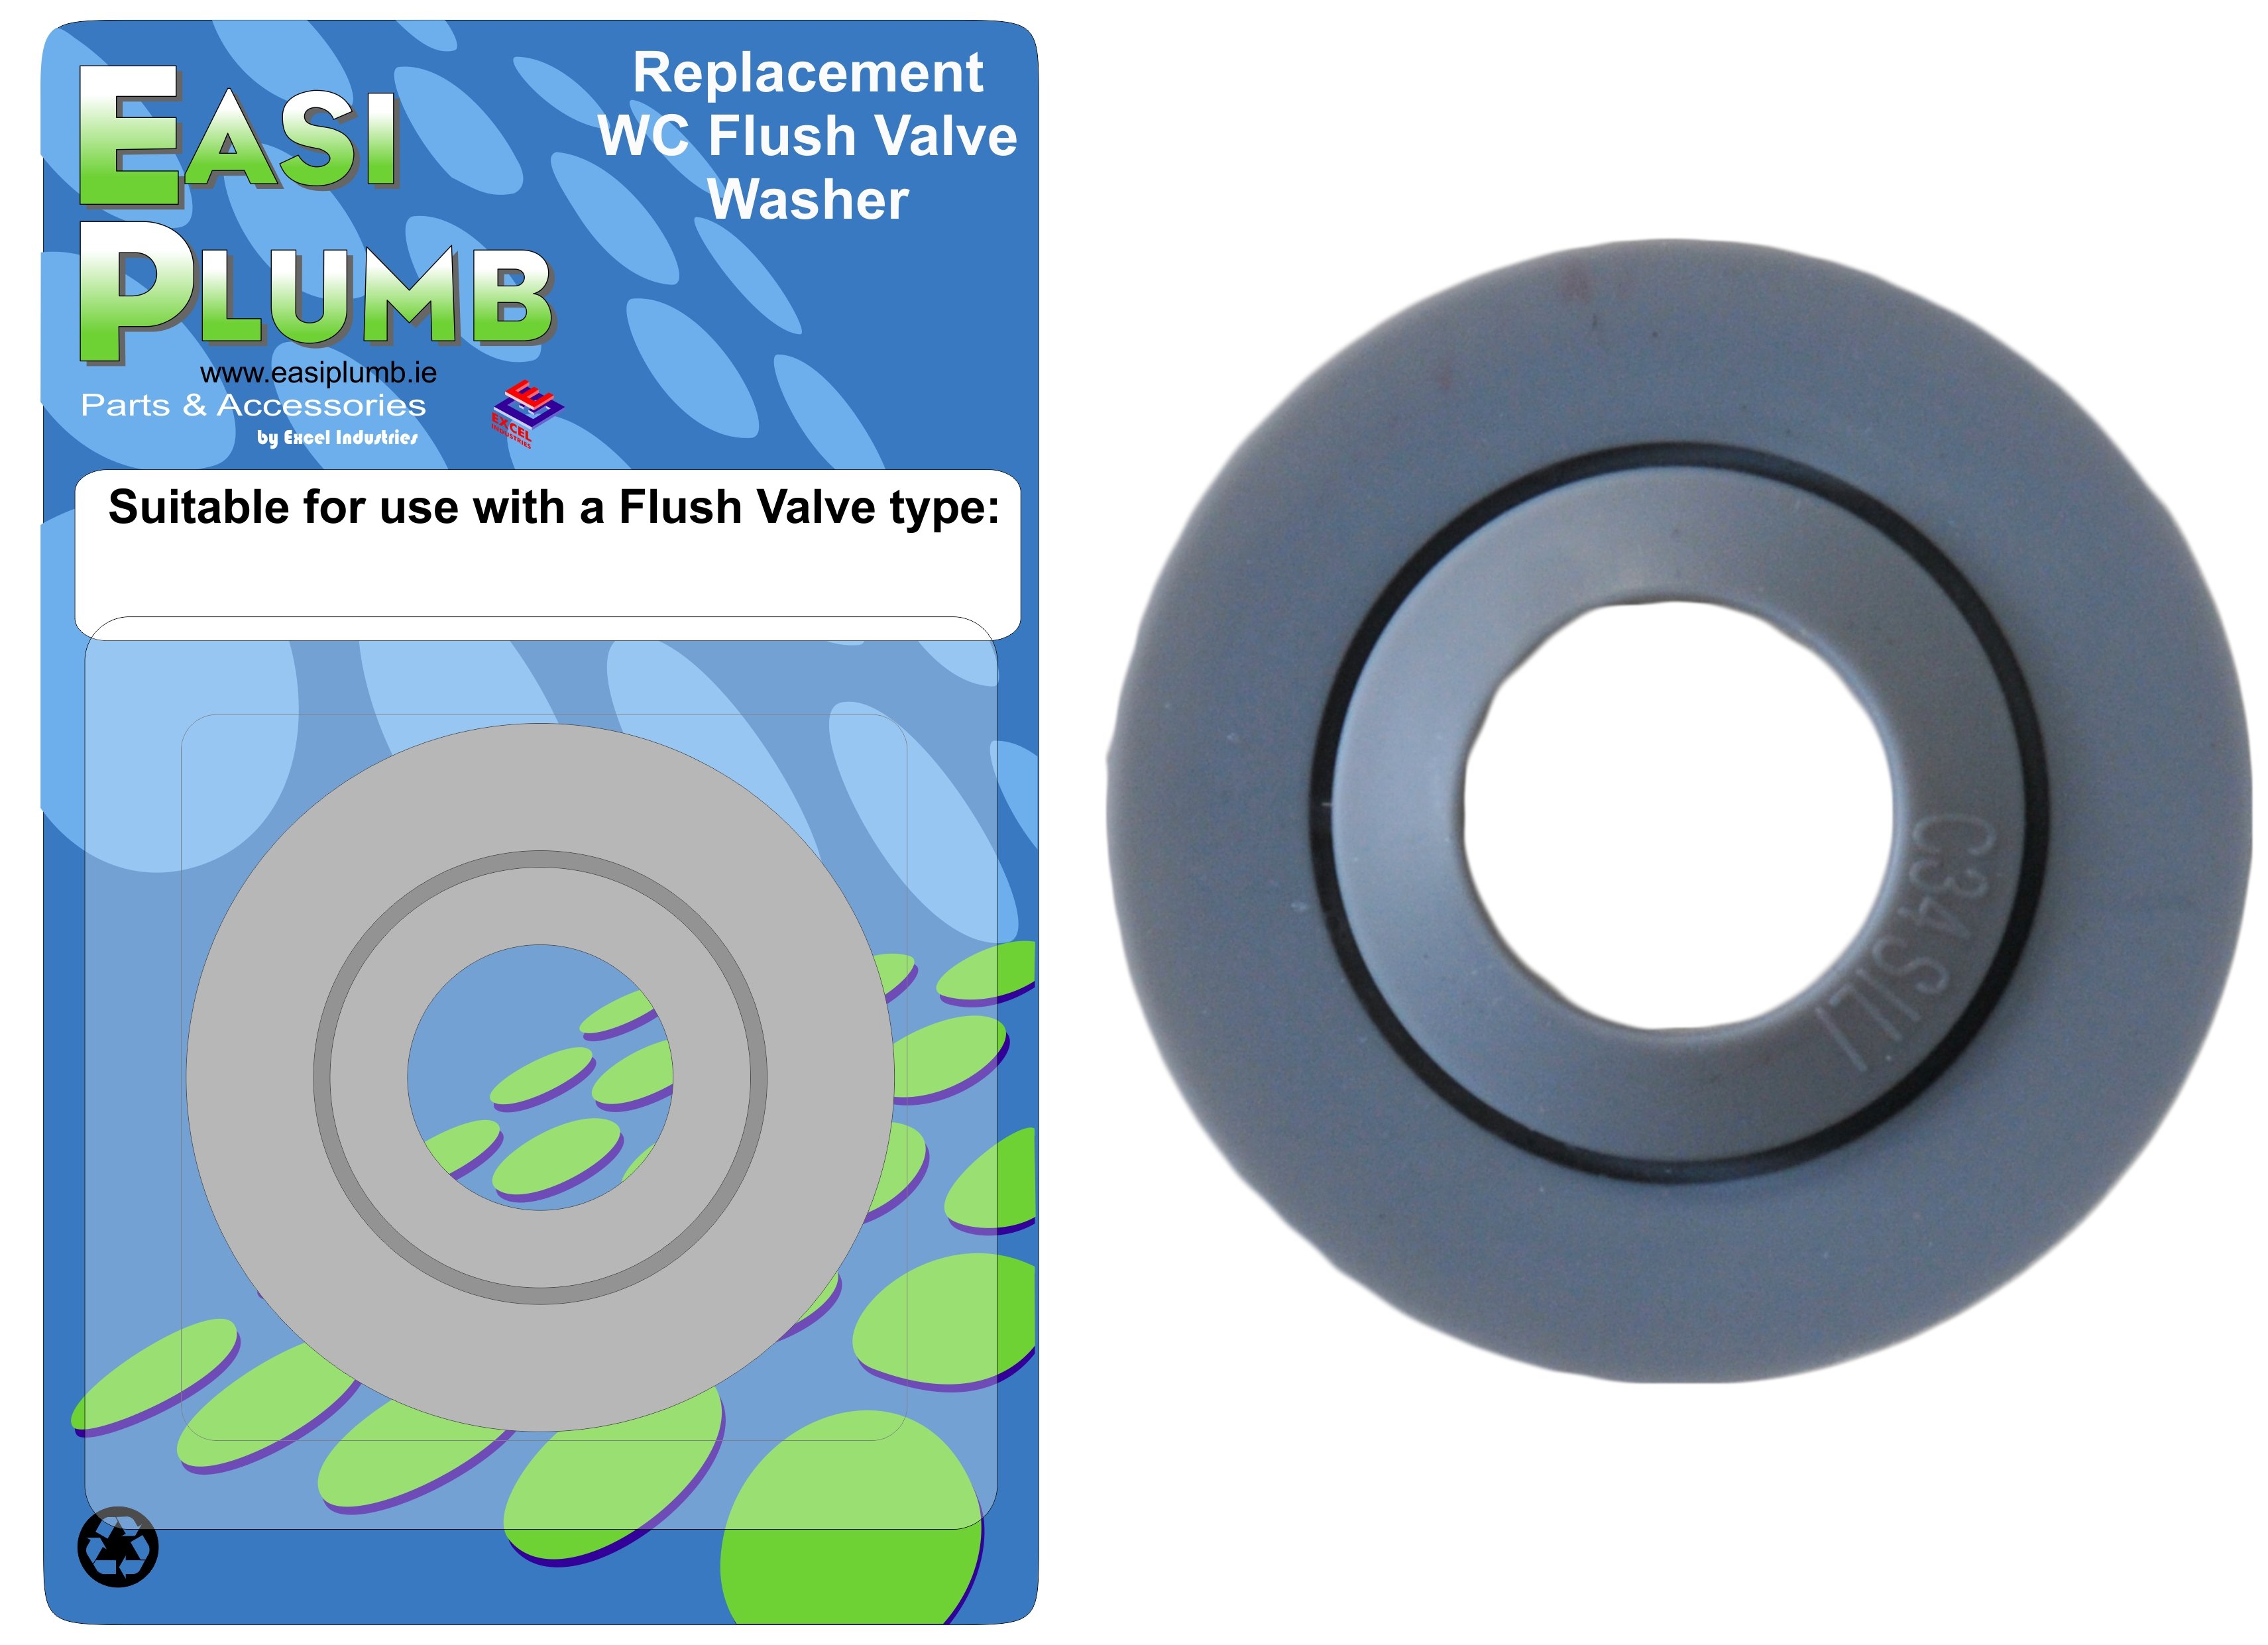 Replacment WC Flush Valve Washer ( Wirquin )